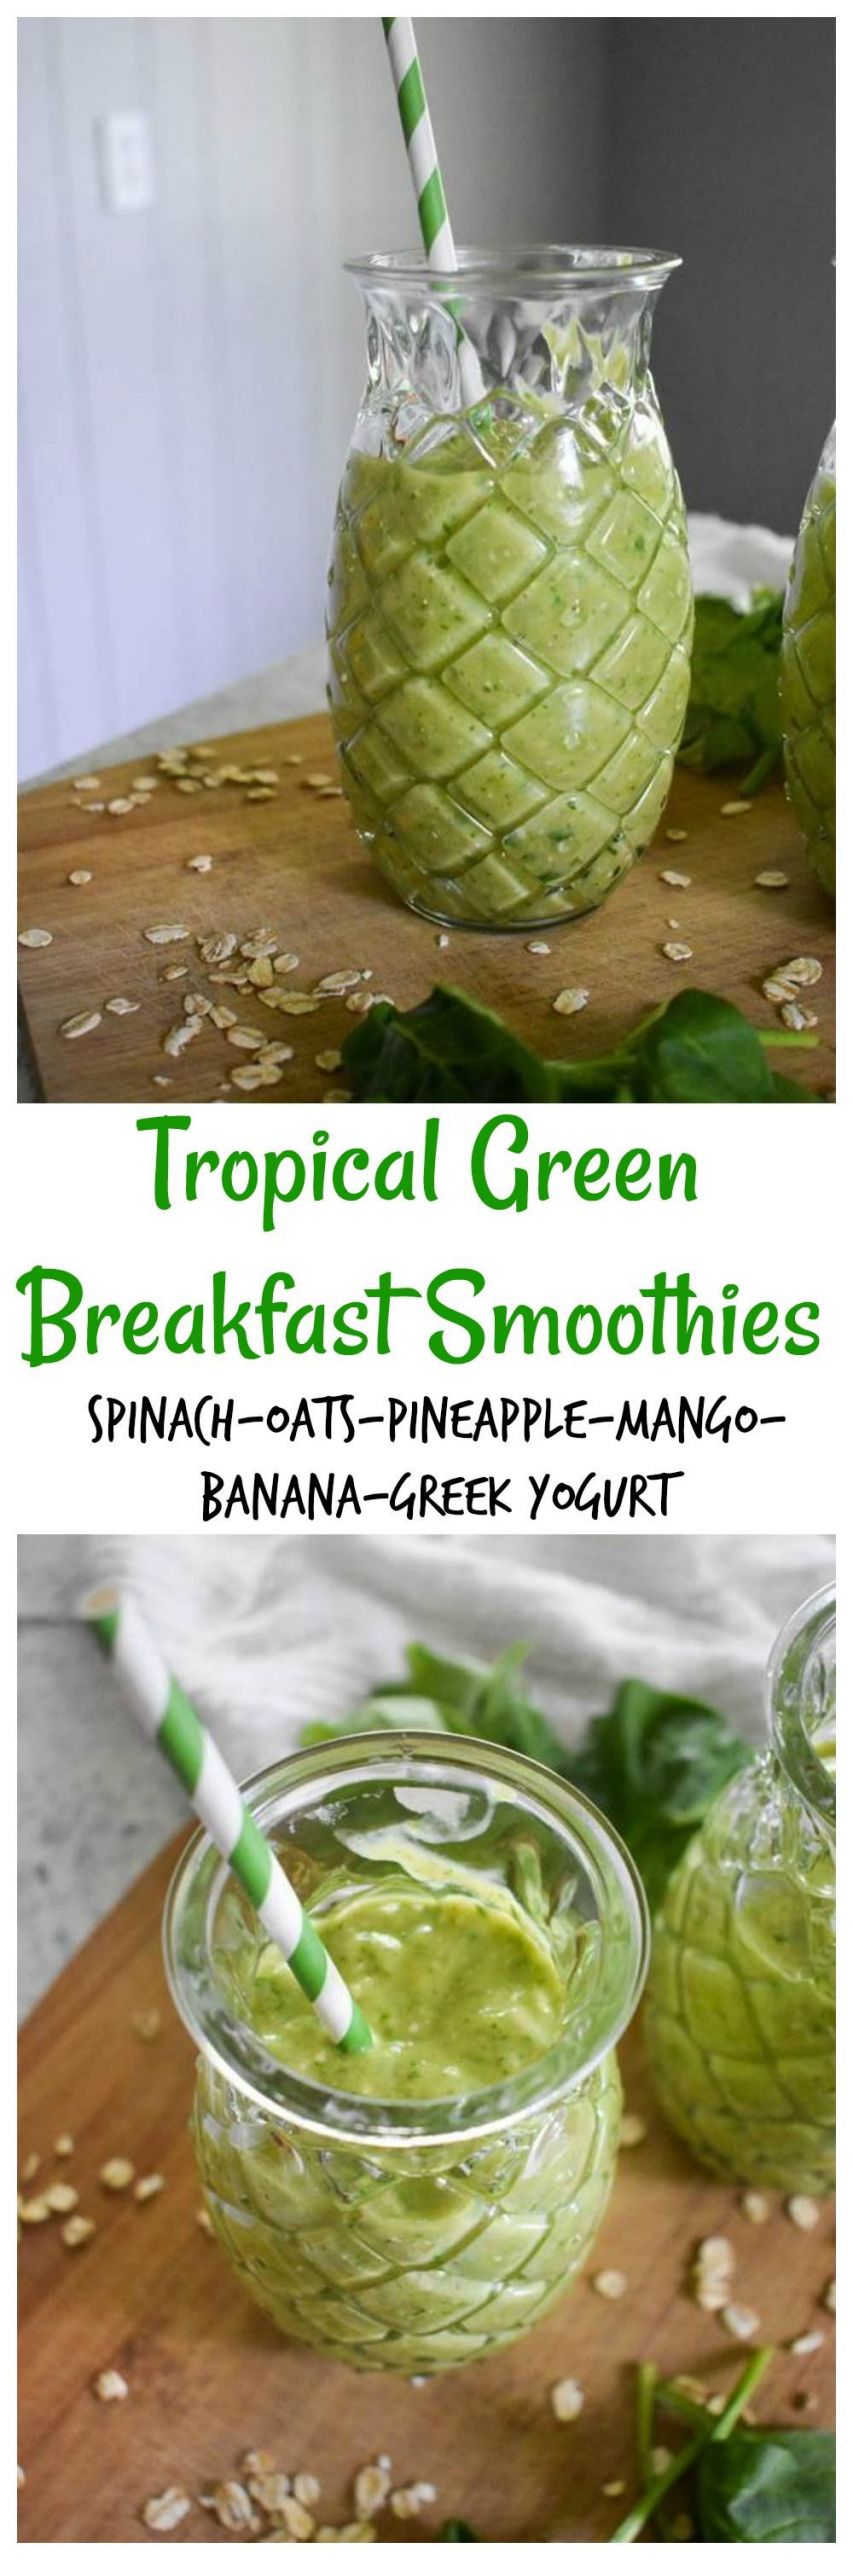 Green Breakfast Smoothie Recipes
 Tropical Green Breakfast Smoothies Recipe